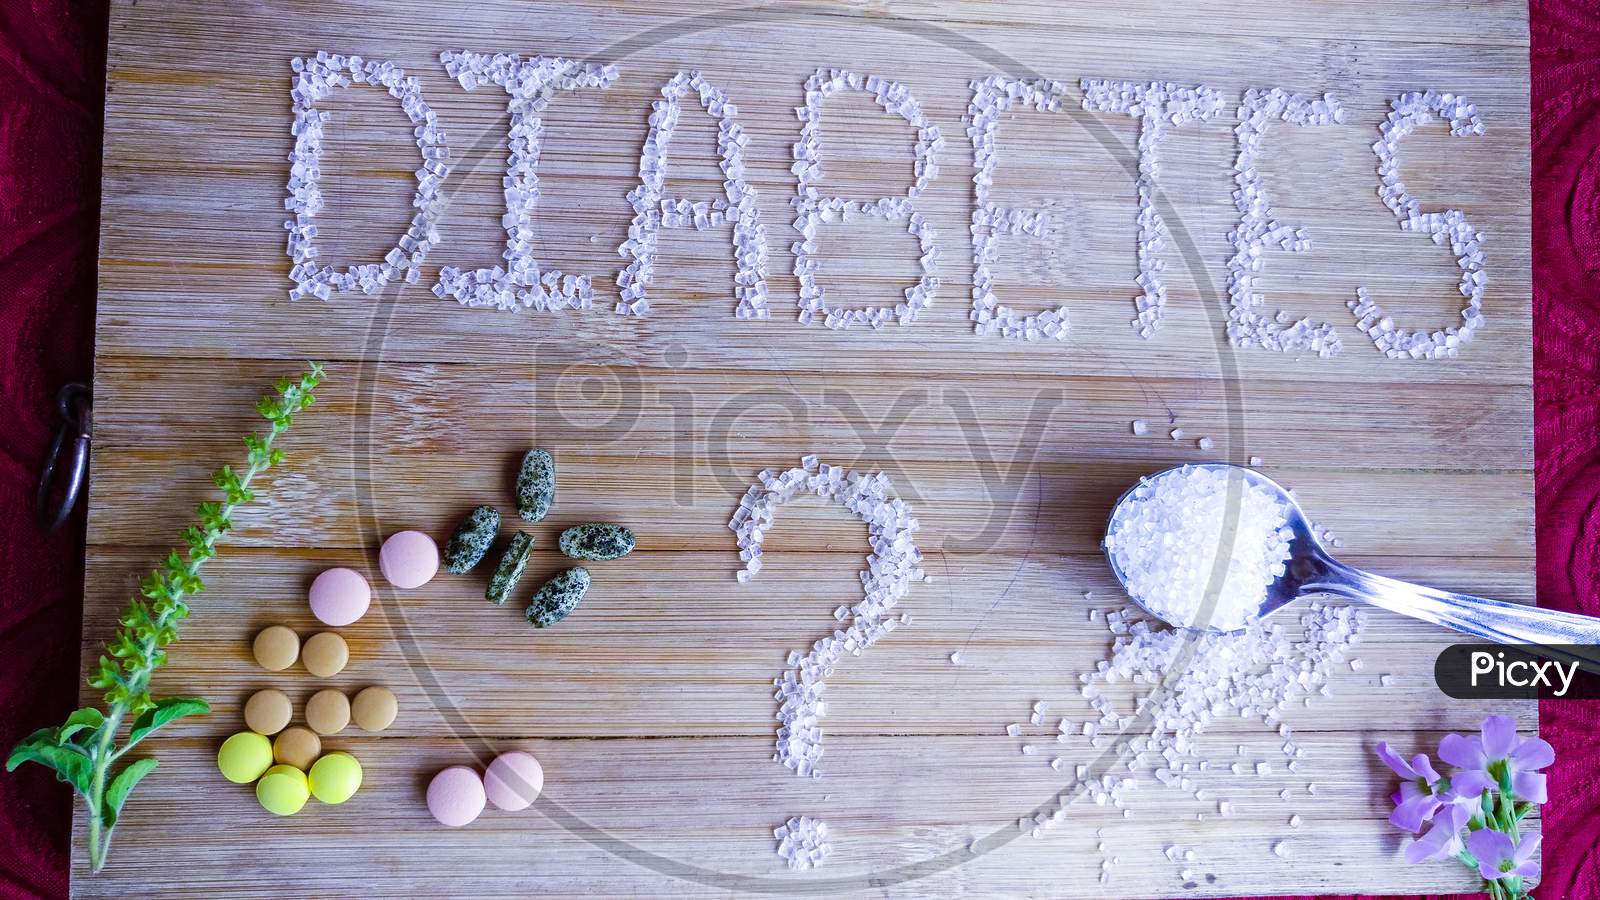 Diabetes written by sugar on wooden table.full spoon of sugar, tablets, Basil